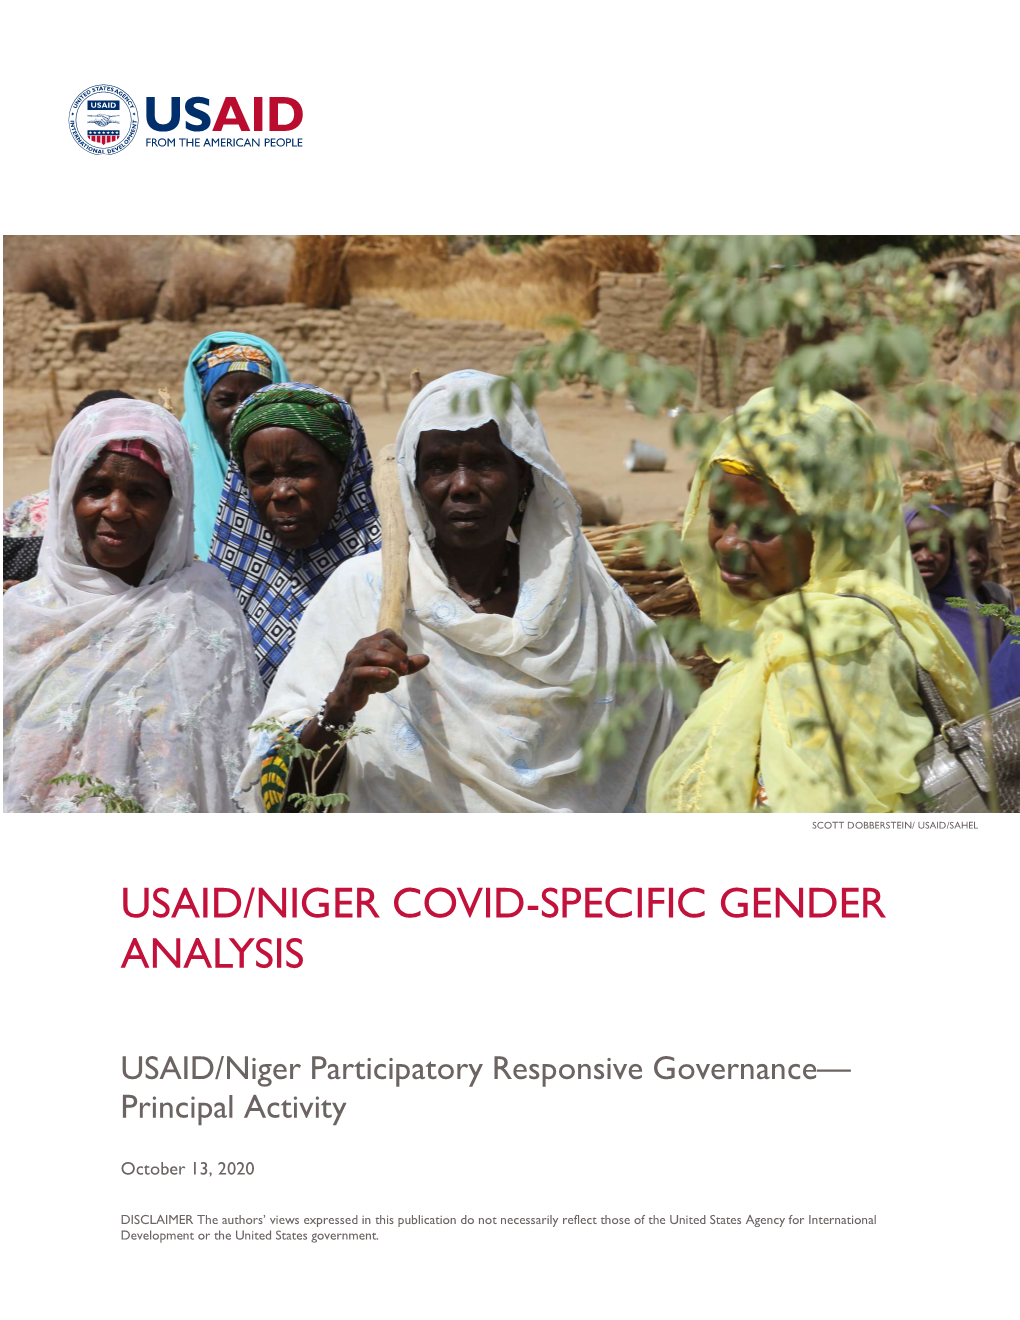 Usaid/Niger Covid-Specific Gender Analysis